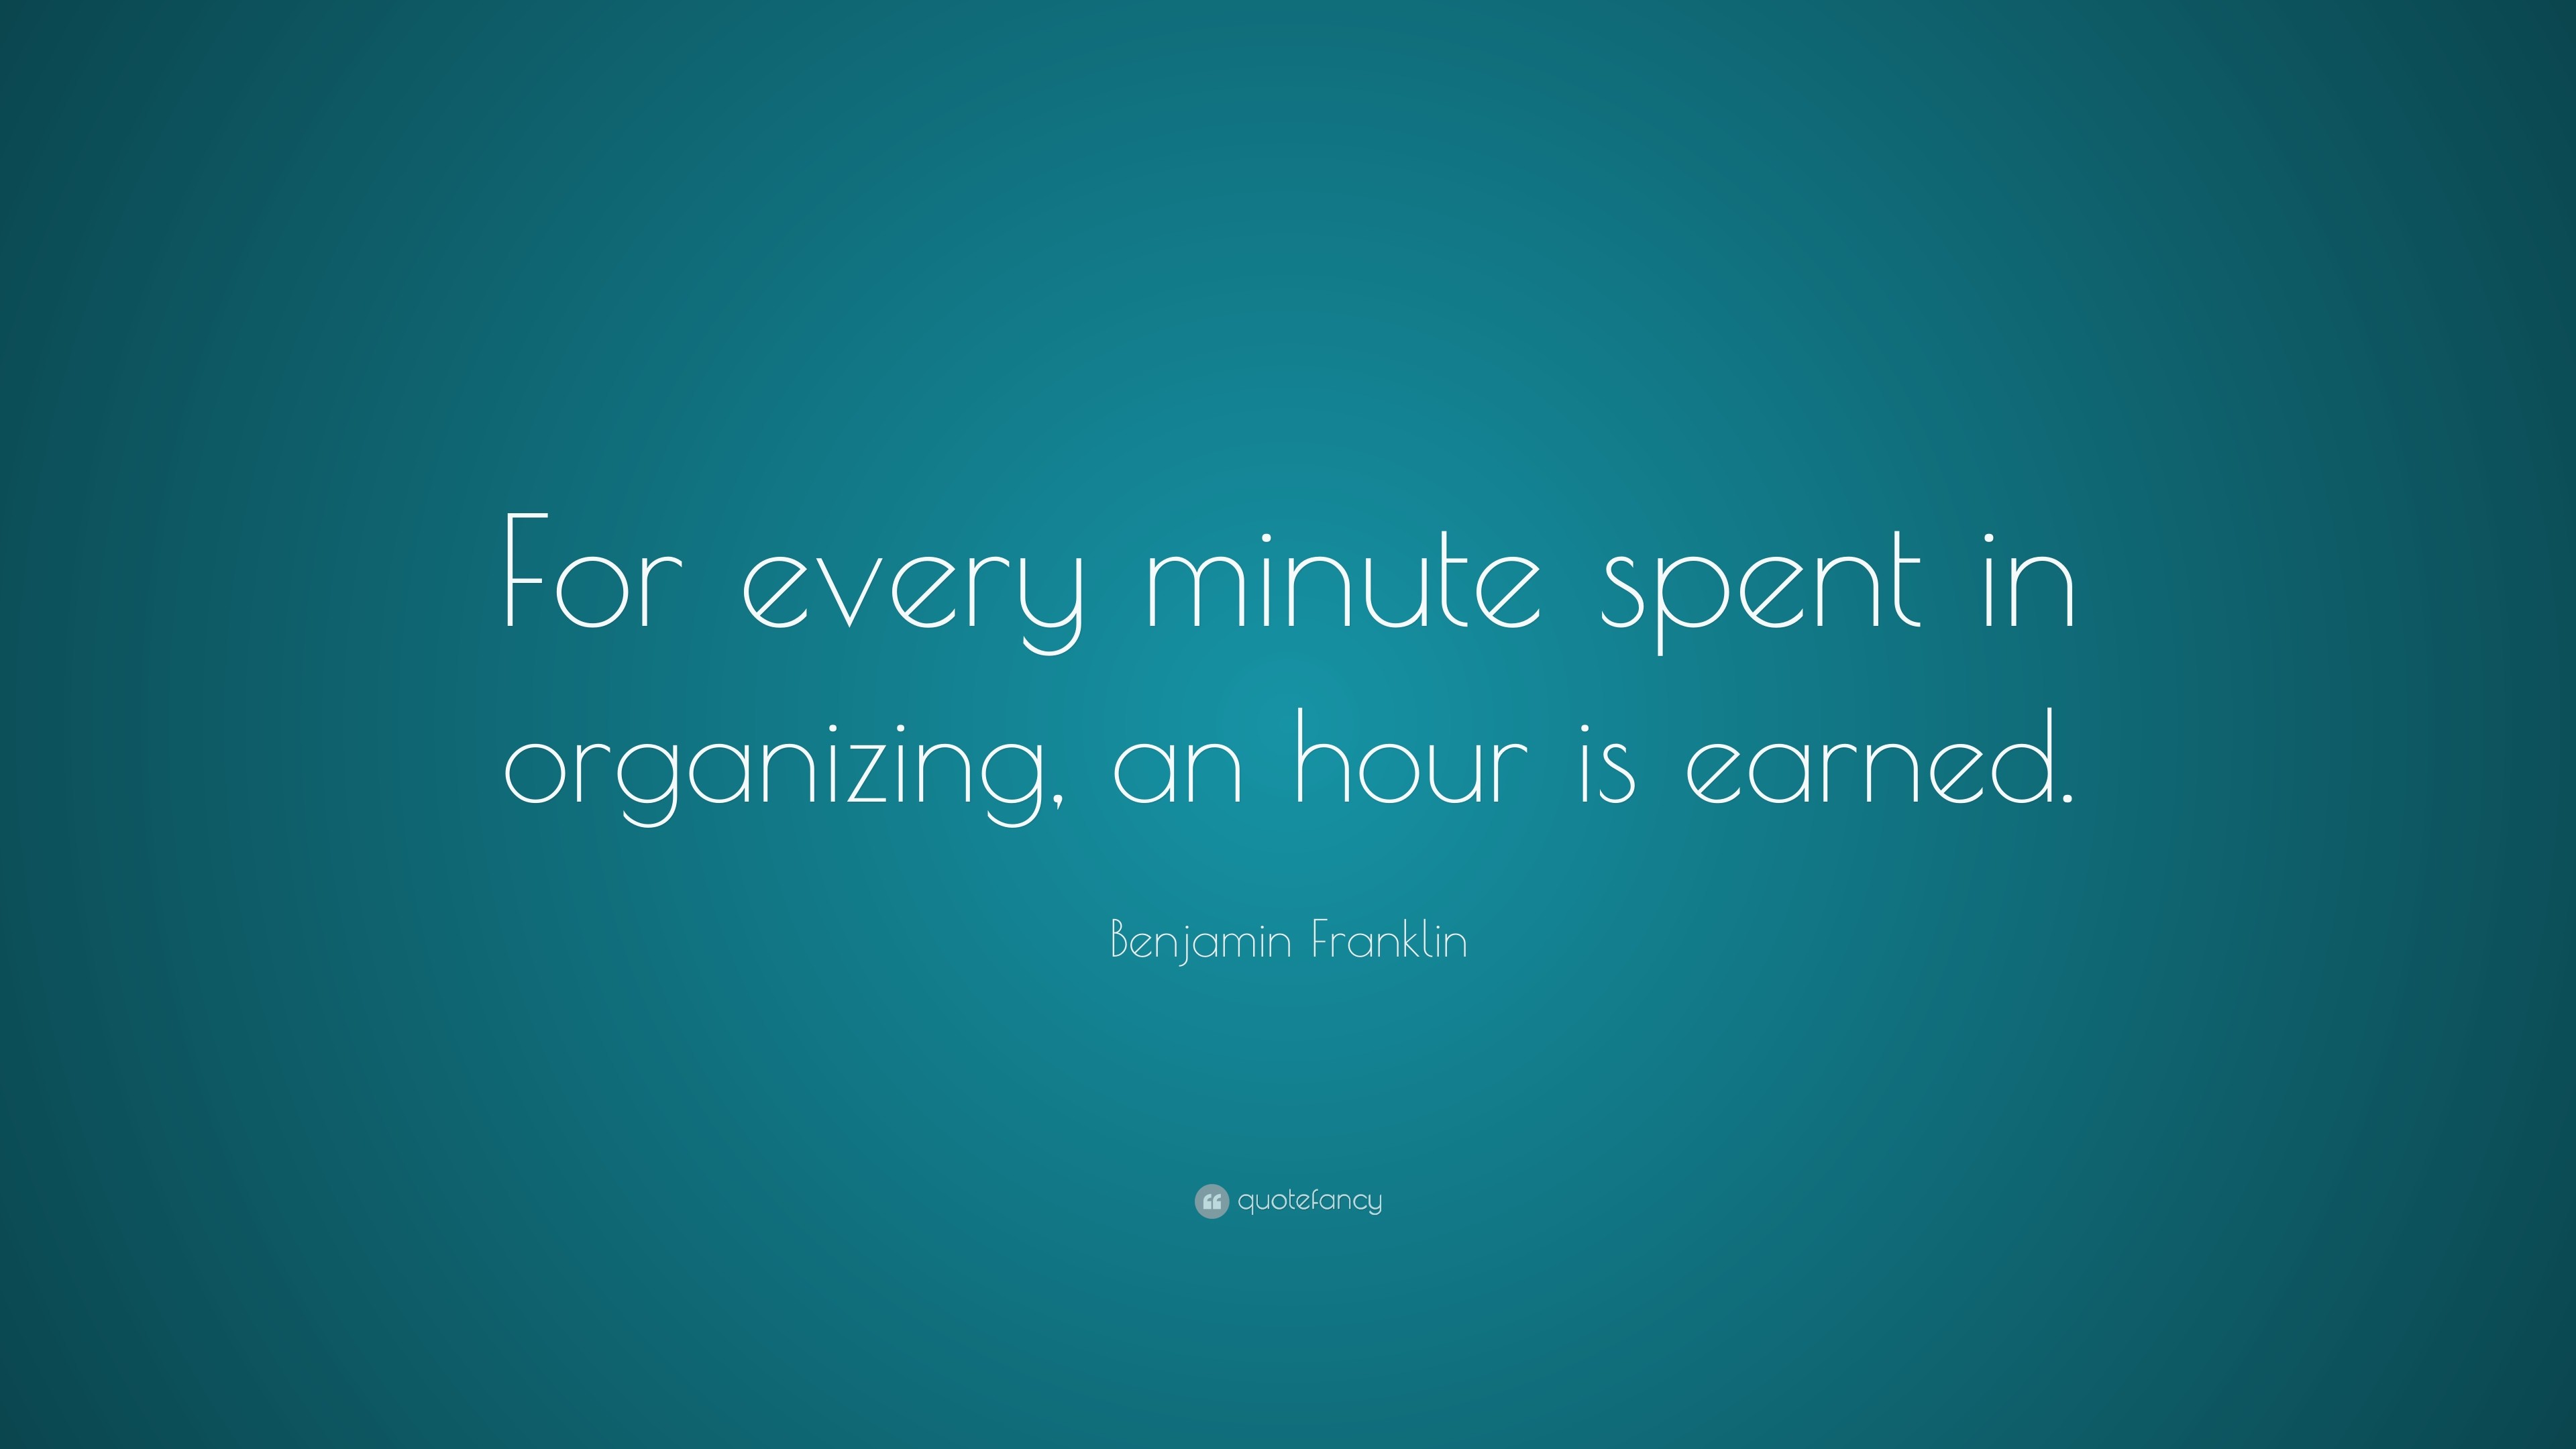 3840x2160 Benjamin Franklin Quote: “For every minute spent in organizing, an hour is  earned